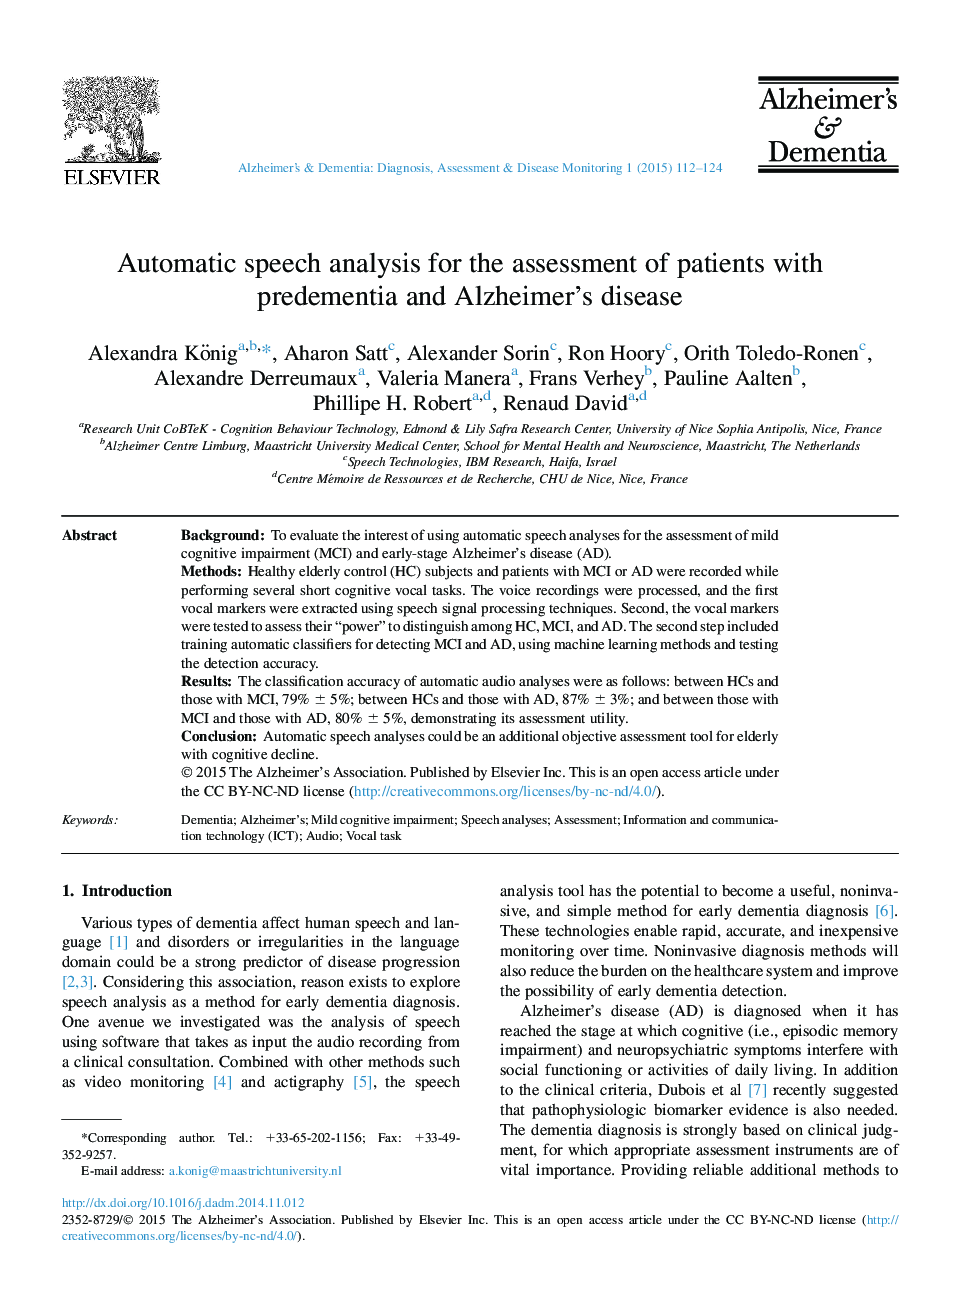 Automatic speech analysis for the assessment of patients with predementia and Alzheimer's disease